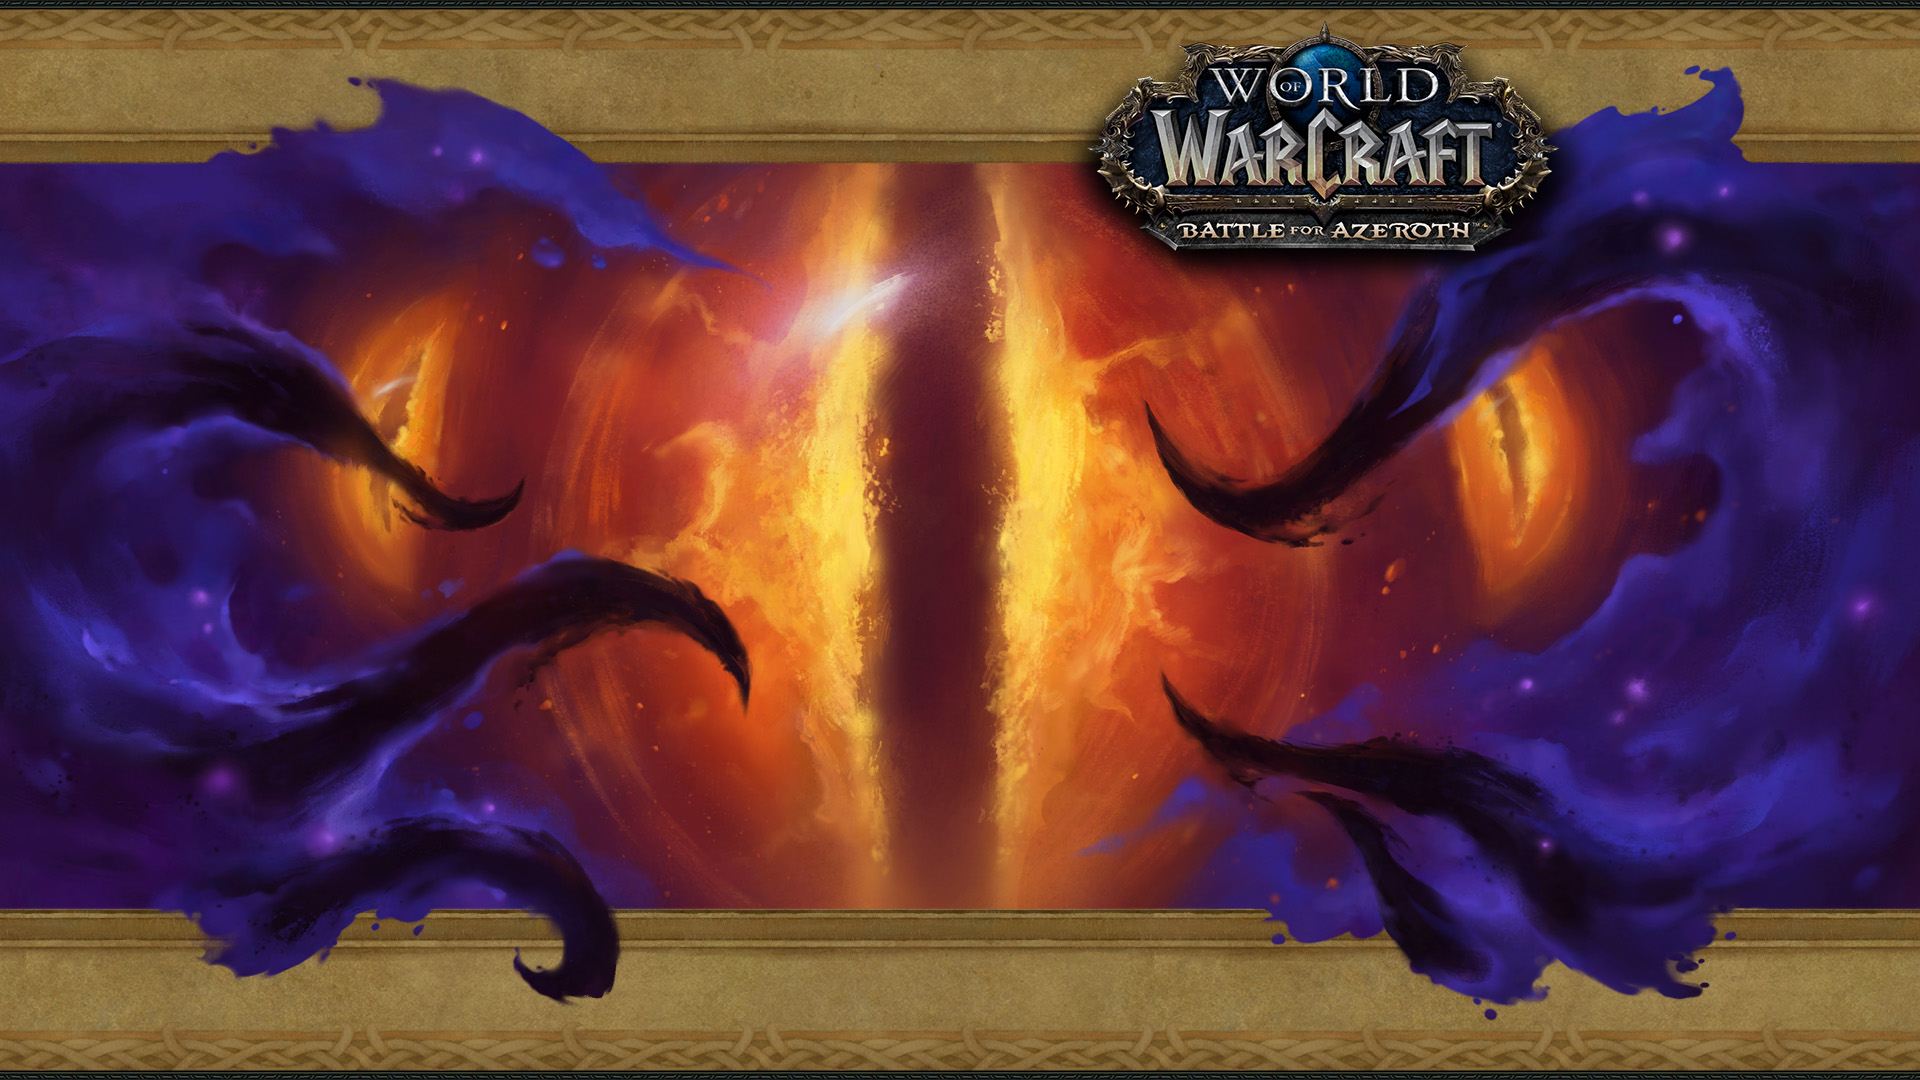 Vision of Stormwind - Wowpedia - Your wiki guide to the World of Warcraft